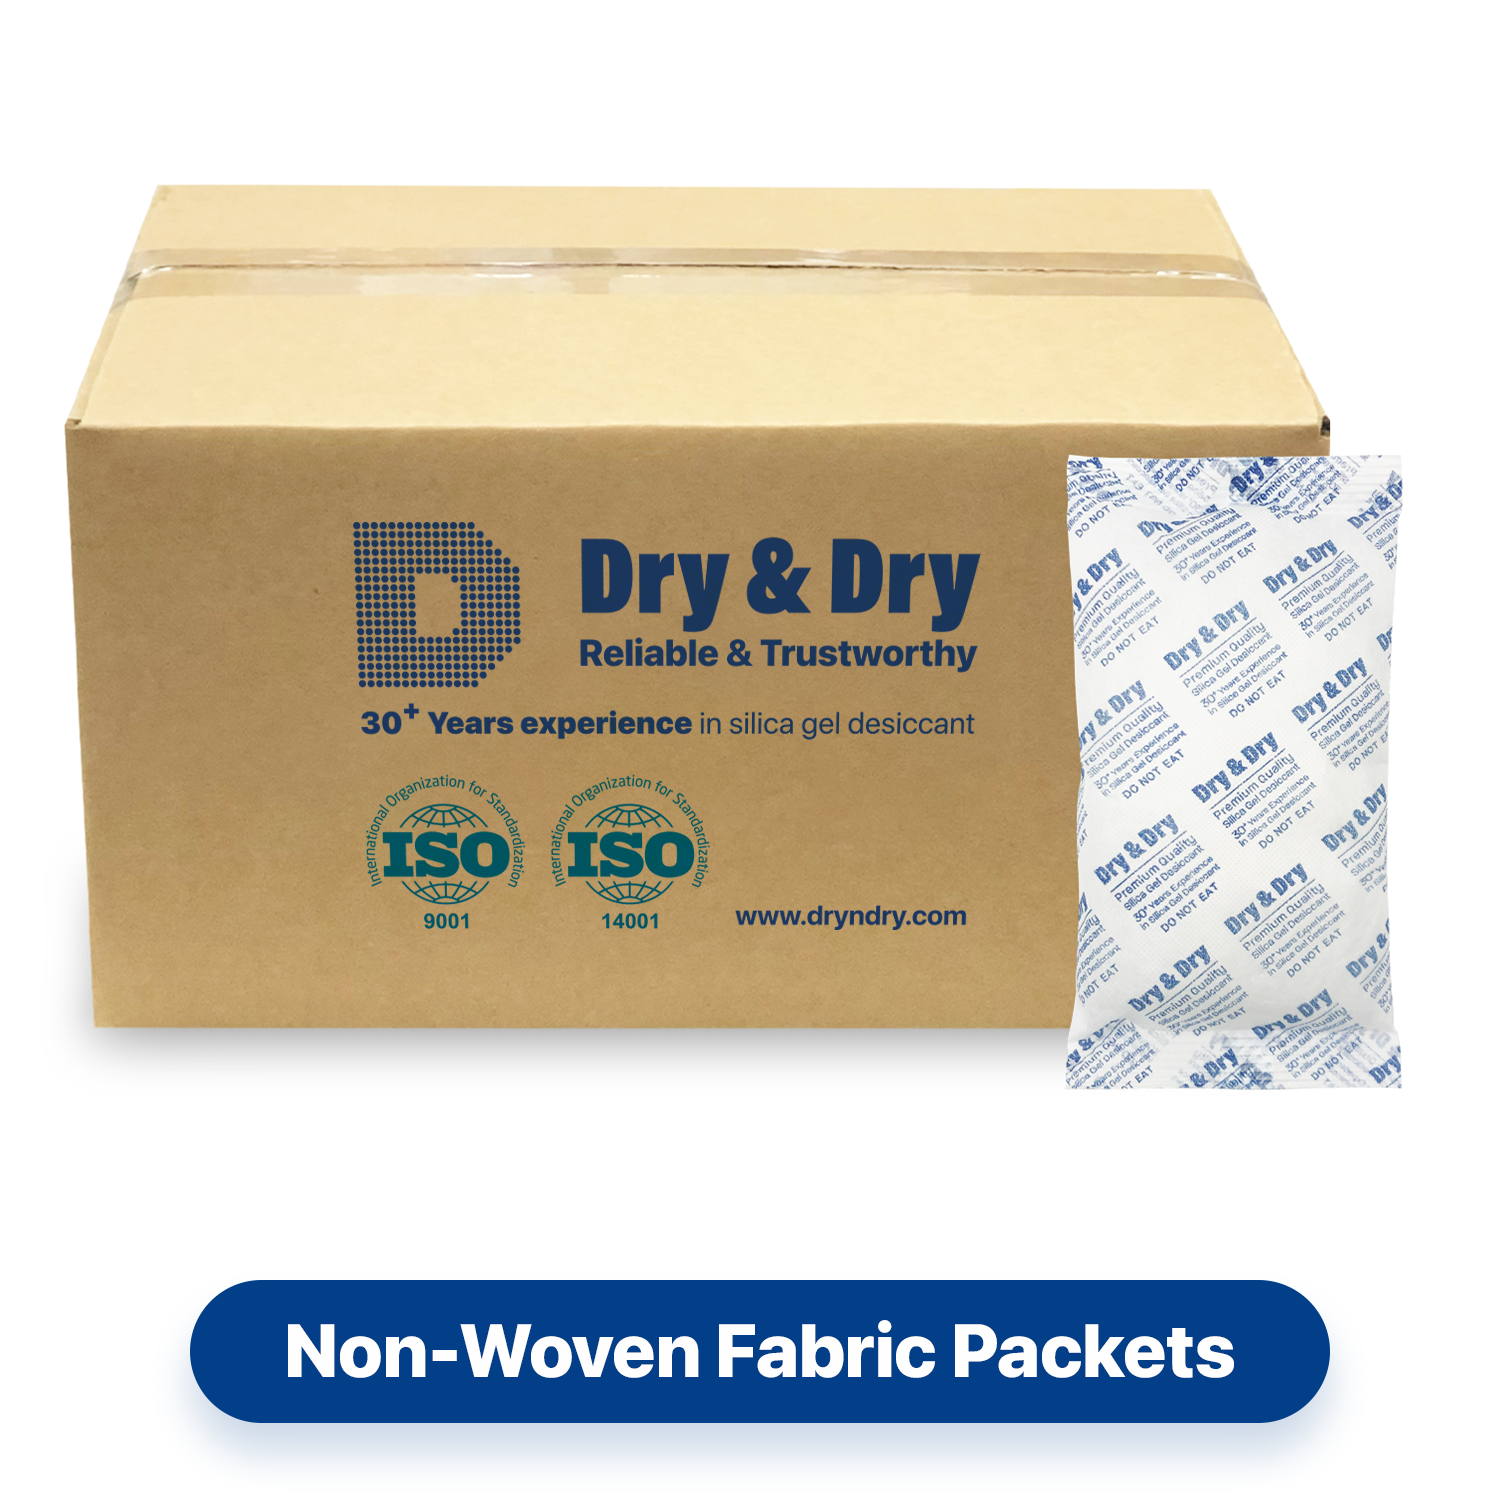 250 Gram [70 Pack]  "Dry & Dry" High Quality Pure & Safe Silica Gel Desiccant - Rechargeable Non-Woven Fabric (Cloth)